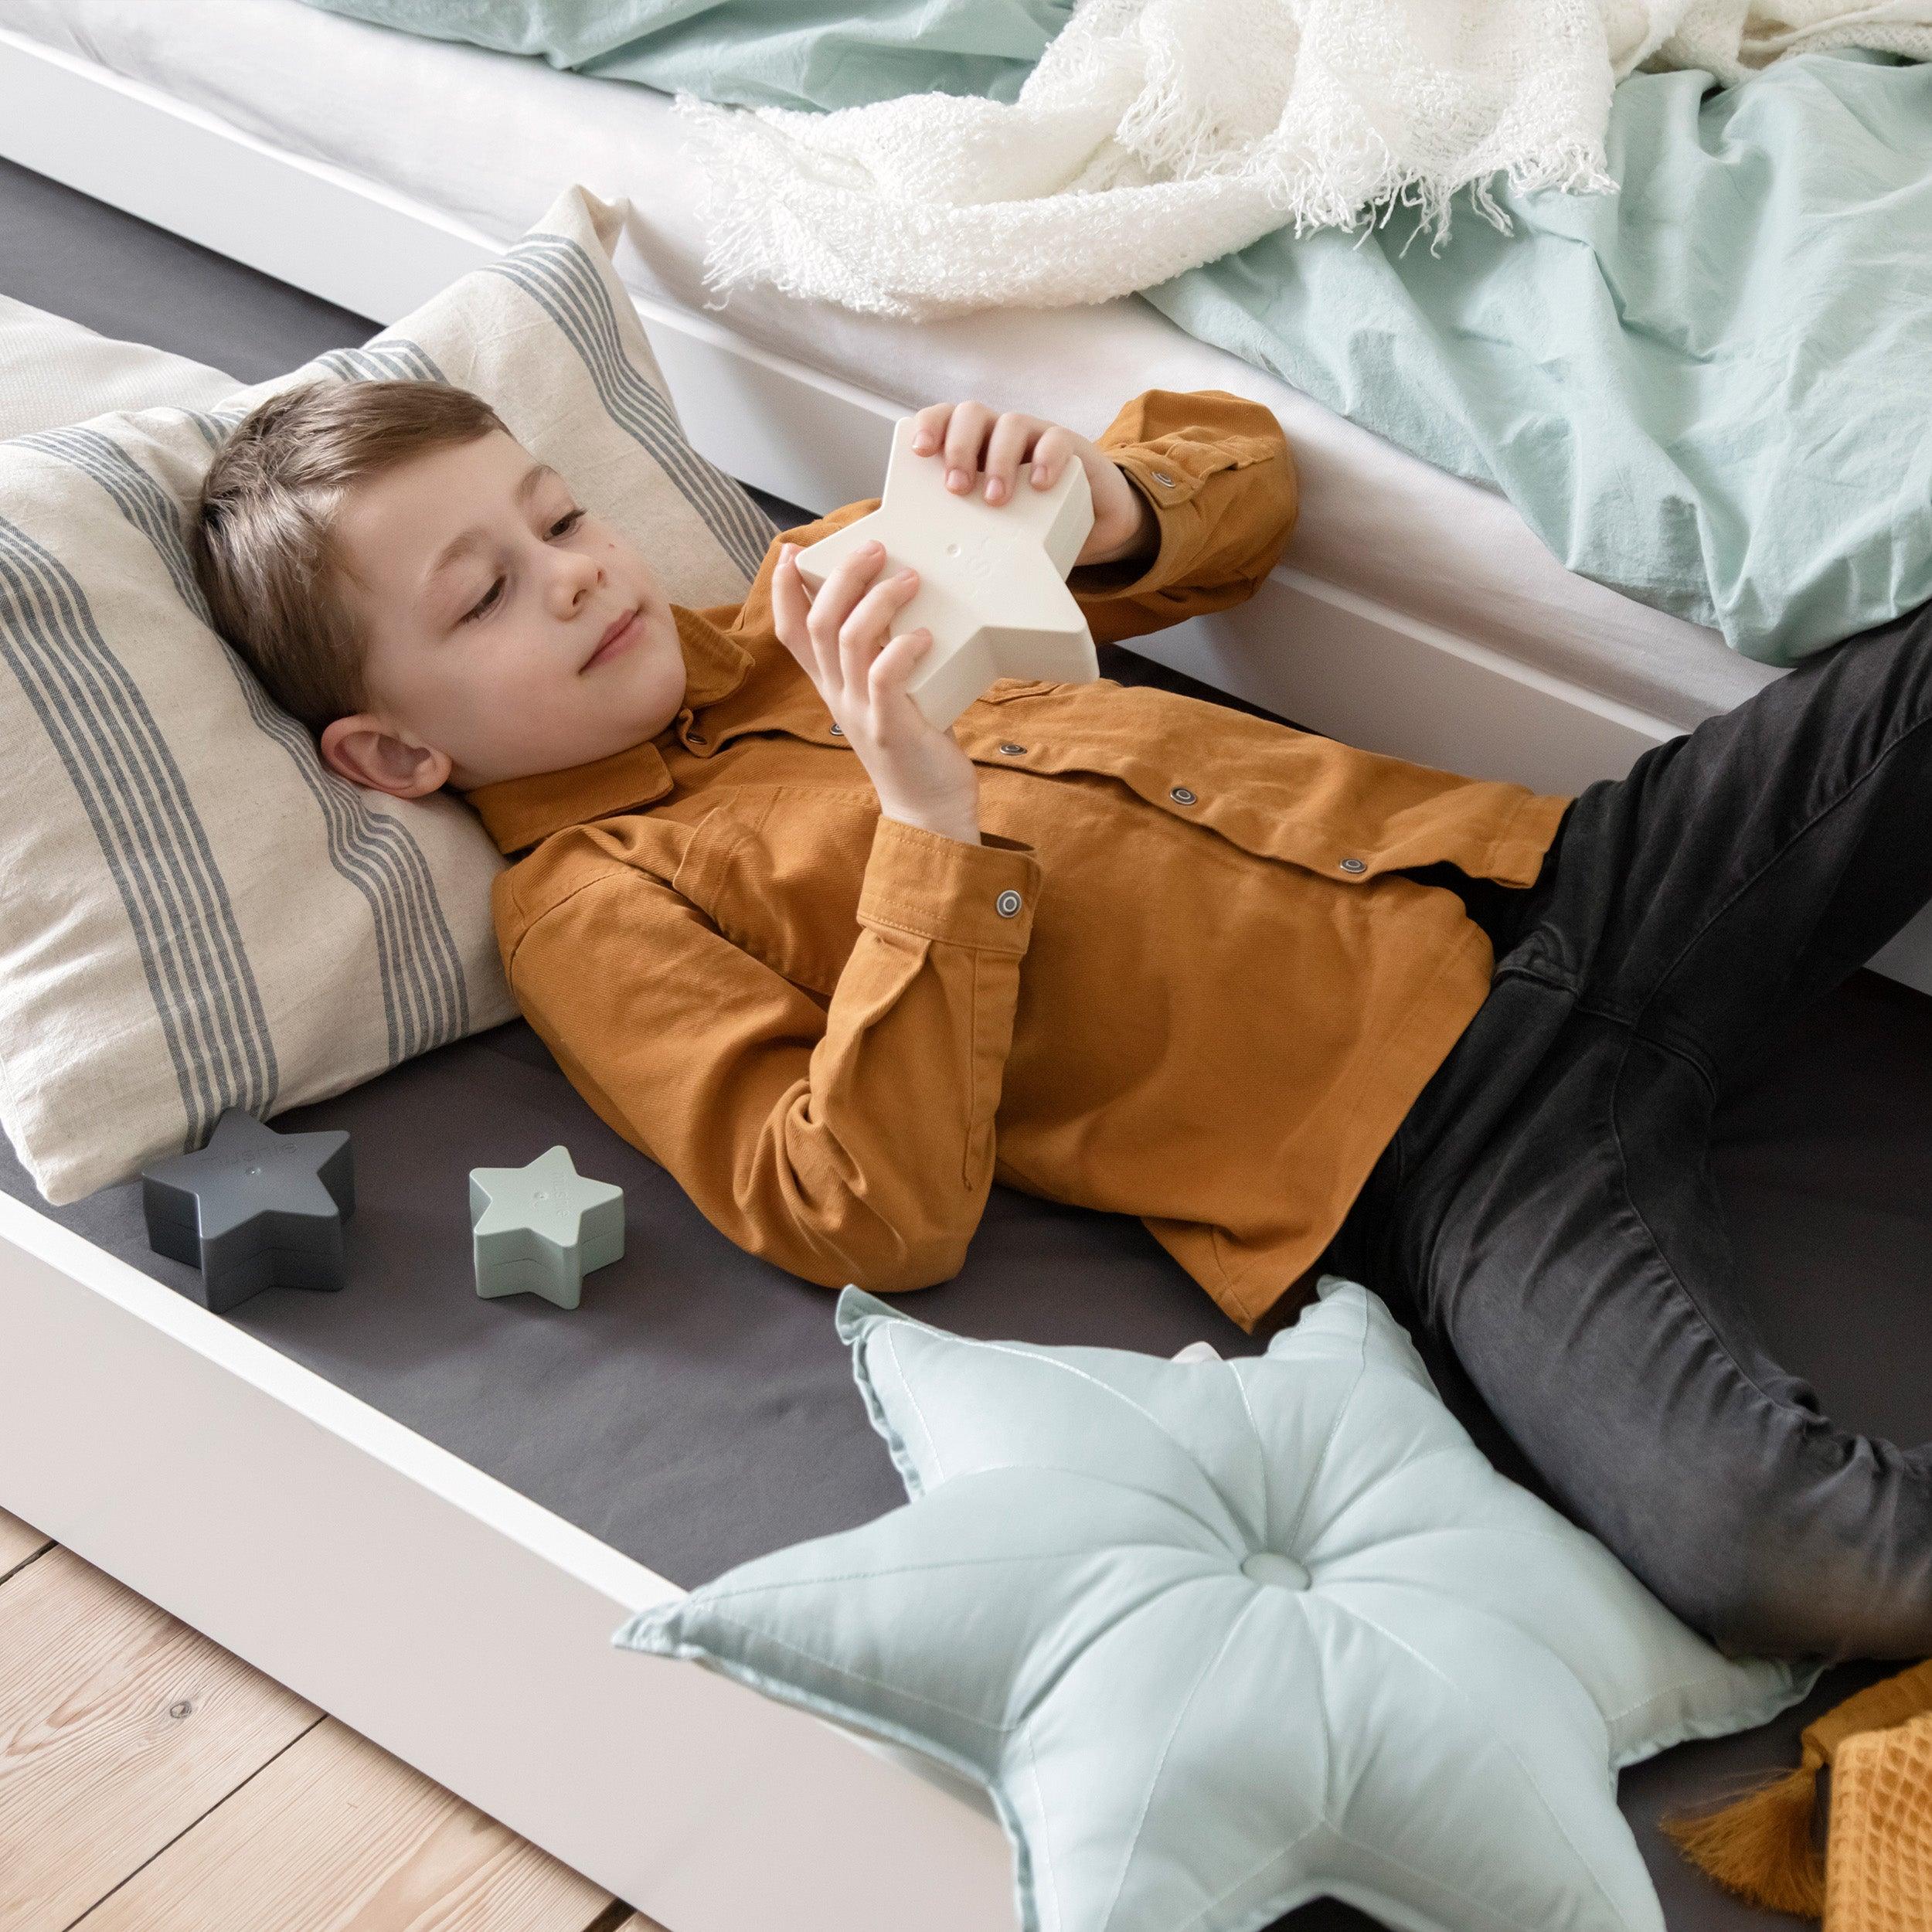 Hoppekids Pull-out Bed ECO Dream and ECO Luxury